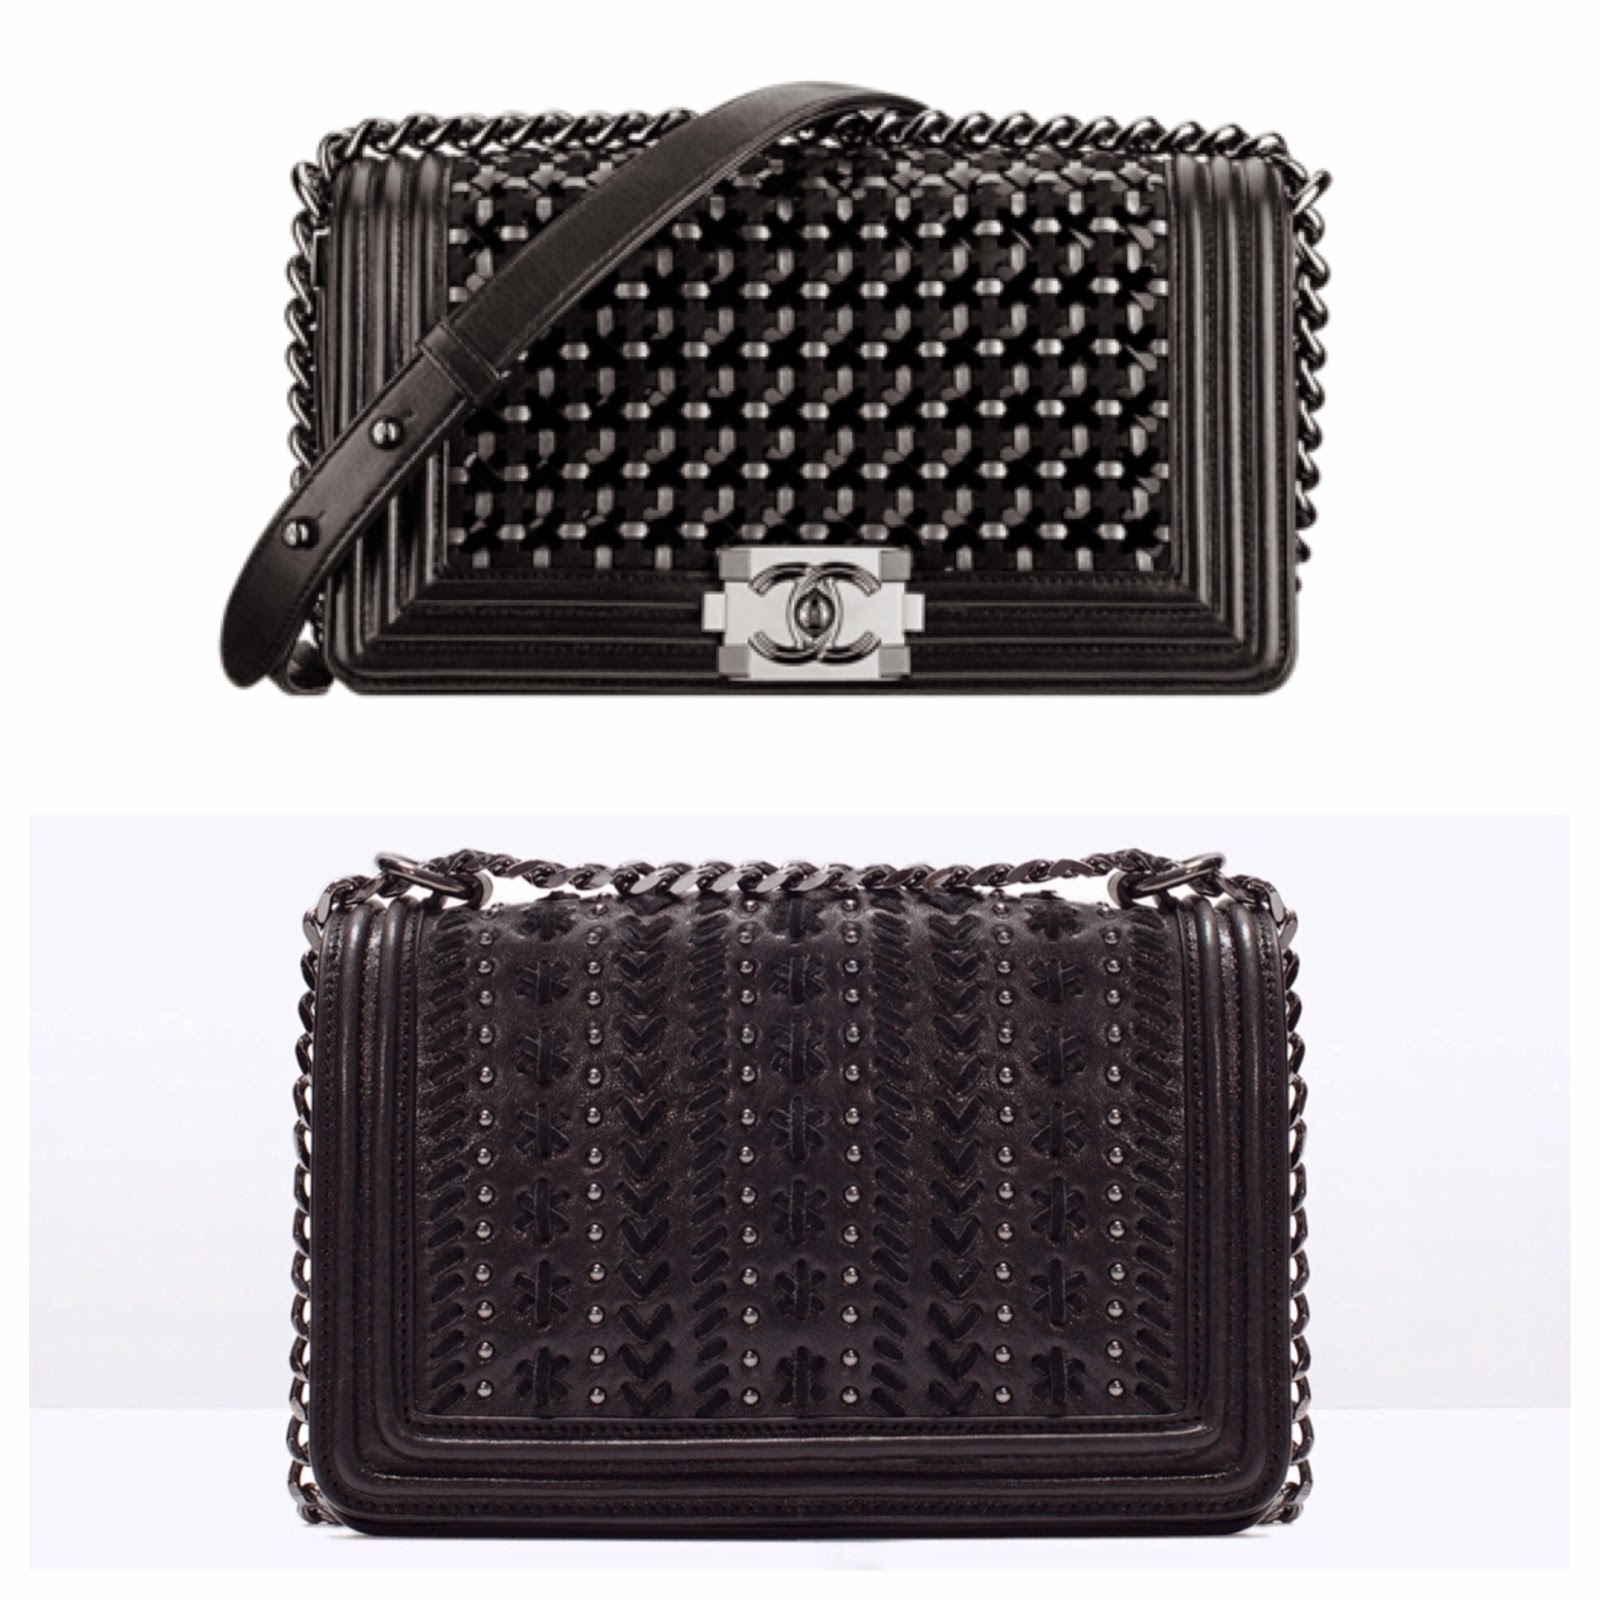 Zara dupe! Steal the Style of the Boy Chanel Handbag!